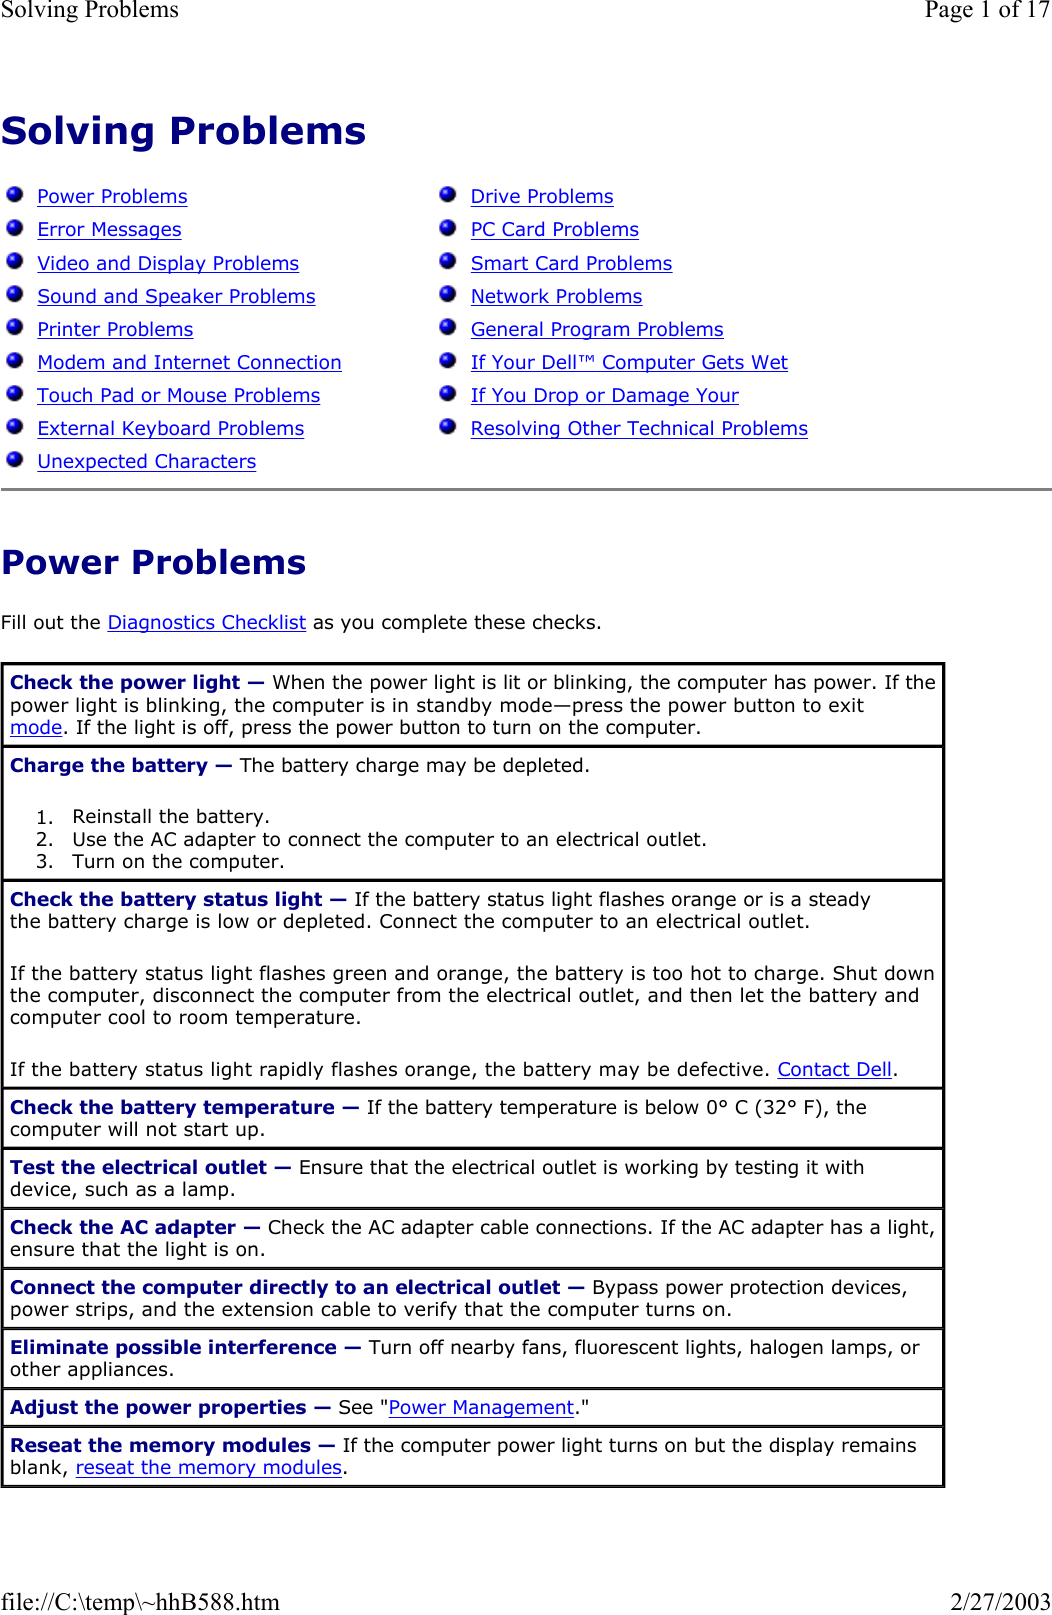 Solving Problems    Power Problems Fill out the Diagnostics Checklist as you complete these checks.   Power Problems   Error Messages   Video and Display Problems   Sound and Speaker Problems   Printer Problems   Modem and Internet Connection   Touch Pad or Mouse Problems   External Keyboard Problems   Unexpected Characters   Drive Problems   PC Card Problems   Smart Card Problems   Network Problems   General Program Problems   If Your Dell™ Computer Gets Wet   If You Drop or Damage Your   Resolving Other Technical Problems Check the power light — When the power light is lit or blinking, the computer has power. If the power light is blinking, the computer is in standby mode—press the power button to exit mode. If the light is off, press the power button to turn on the computer. Charge the battery — The battery charge may be depleted. 1. Reinstall the battery.  2. Use the AC adapter to connect the computer to an electrical outlet.  3. Turn on the computer.  Check the battery status light — If the battery status light flashes orange or is a steady the battery charge is low or depleted. Connect the computer to an electrical outlet. If the battery status light flashes green and orange, the battery is too hot to charge. Shut down the computer, disconnect the computer from the electrical outlet, and then let the battery and computer cool to room temperature. If the battery status light rapidly flashes orange, the battery may be defective. Contact Dell. Check the battery temperature — If the battery temperature is below 0° C (32° F), the computer will not start up. Test the electrical outlet — Ensure that the electrical outlet is working by testing it with device, such as a lamp. Check the AC adapter — Check the AC adapter cable connections. If the AC adapter has a light, ensure that the light is on. Connect the computer directly to an electrical outlet — Bypass power protection devices, power strips, and the extension cable to verify that the computer turns on. Eliminate possible interference — Turn off nearby fans, fluorescent lights, halogen lamps, or other appliances. Adjust the power properties — See &quot;Power Management.&quot; Reseat the memory modules — If the computer power light turns on but the display remains blank, reseat the memory modules. Page 1 of 17Solving Problems2/27/2003file://C:\temp\~hhB588.htm